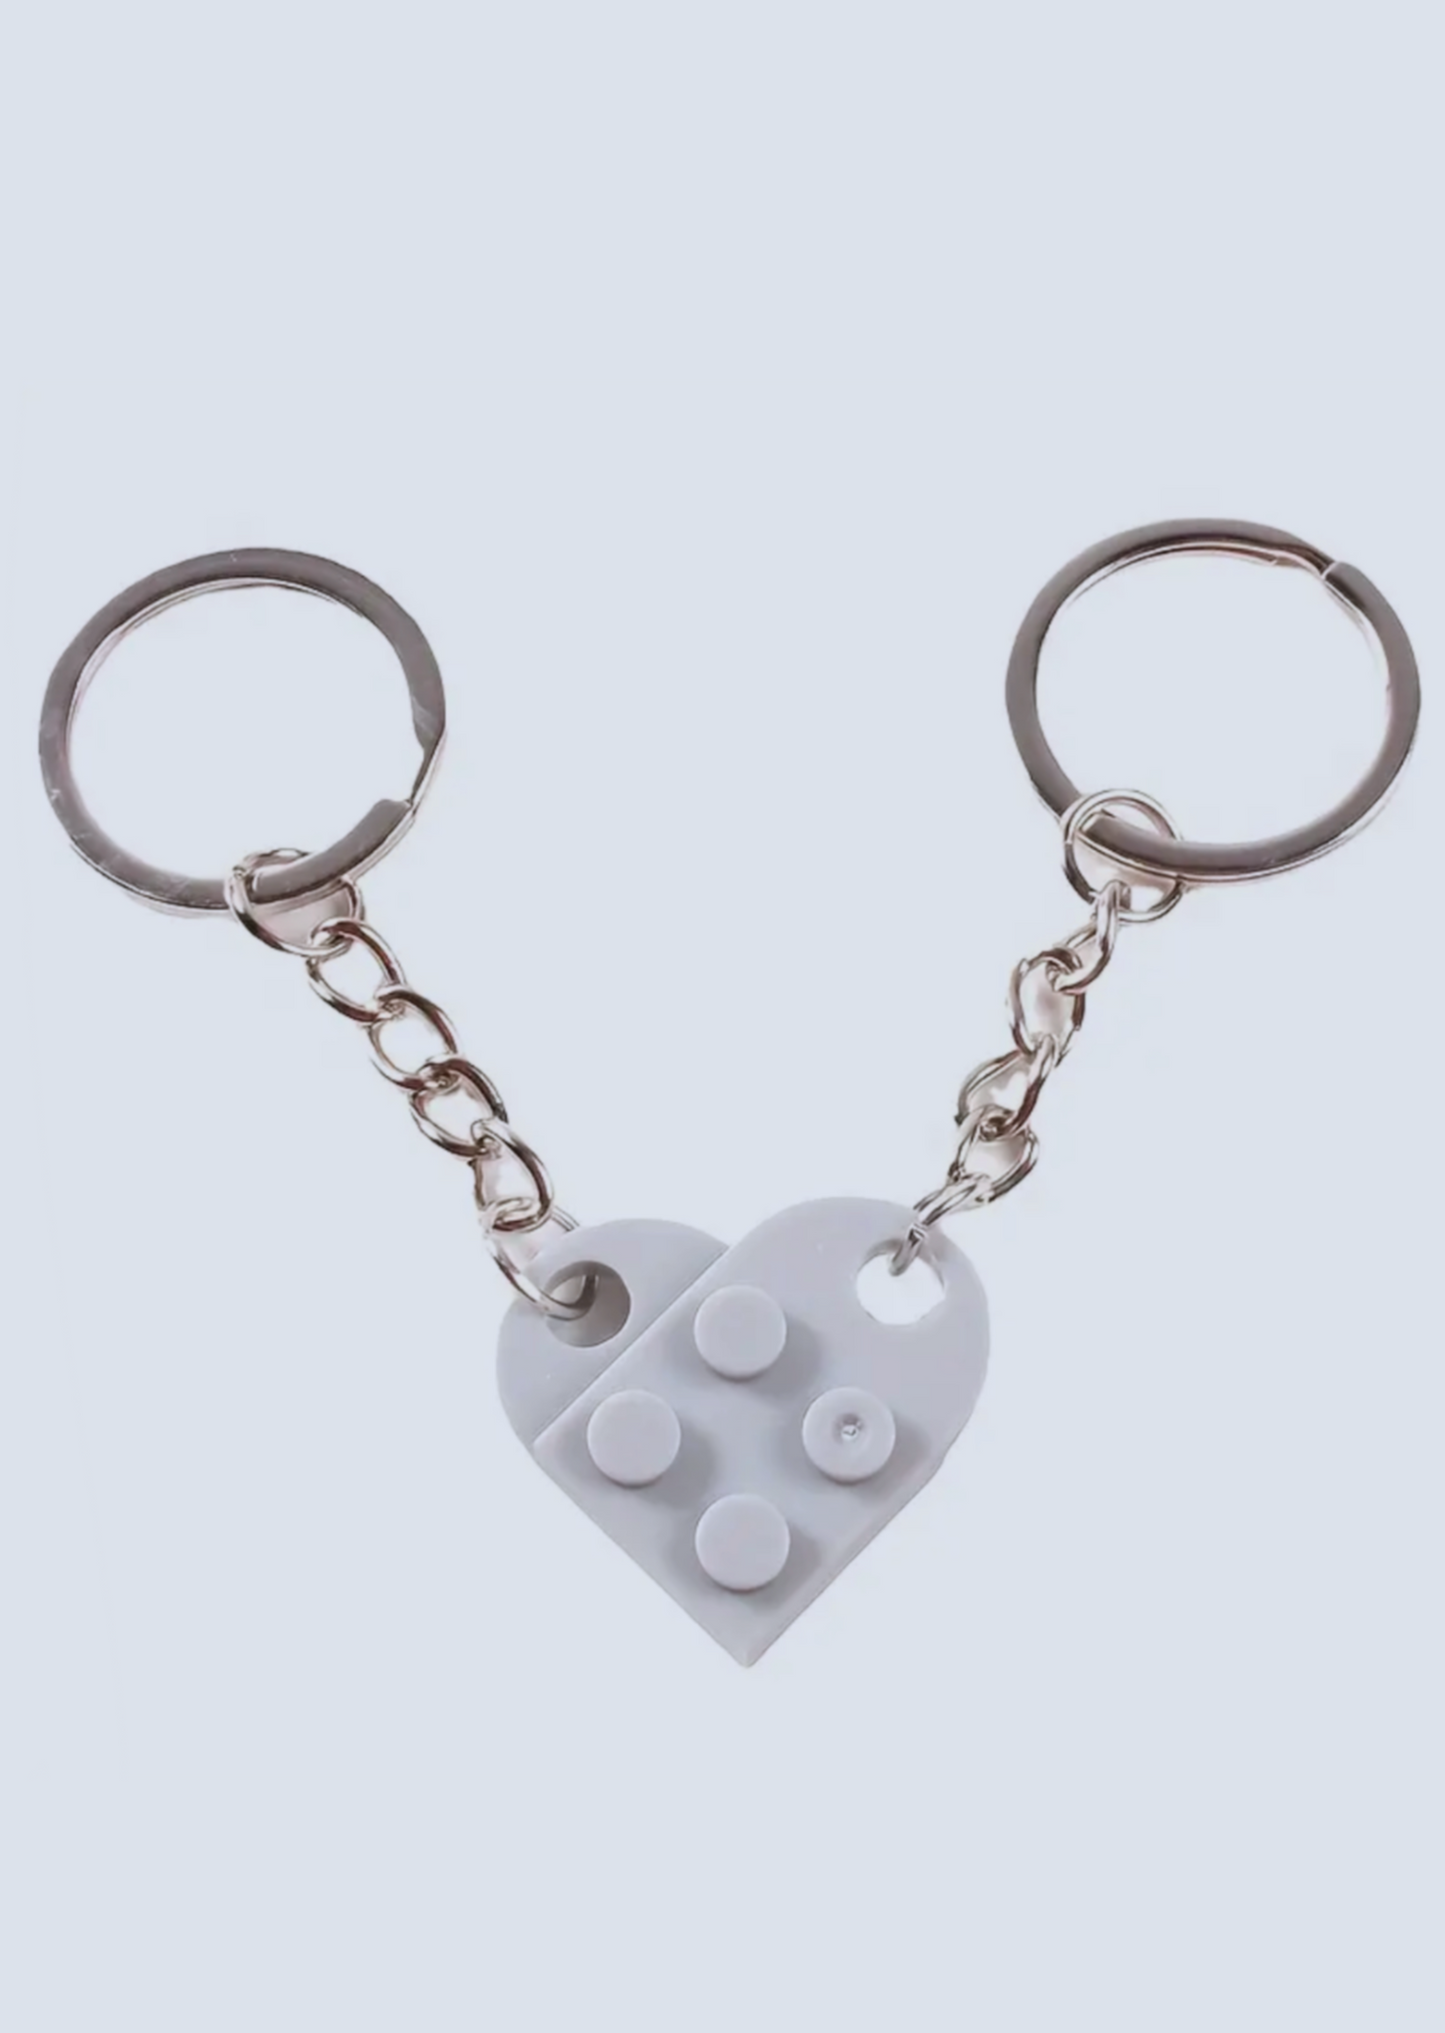 Matching Connecting Brick Keychains